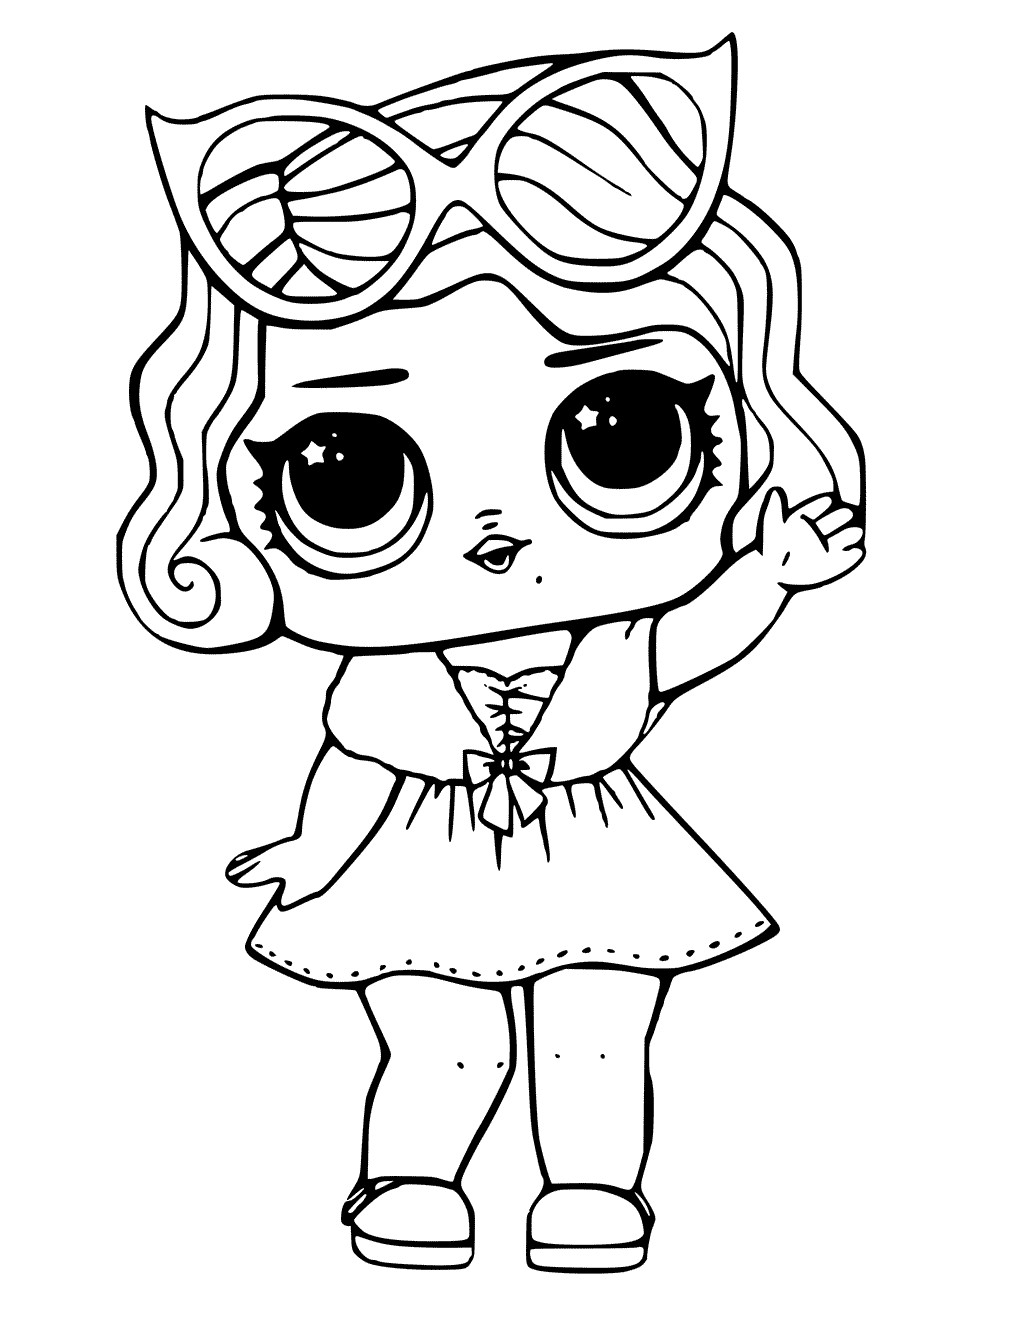 Baby Lol Coloring Pages
 LOL Surprise Doll Coloring Pages Leading Baby